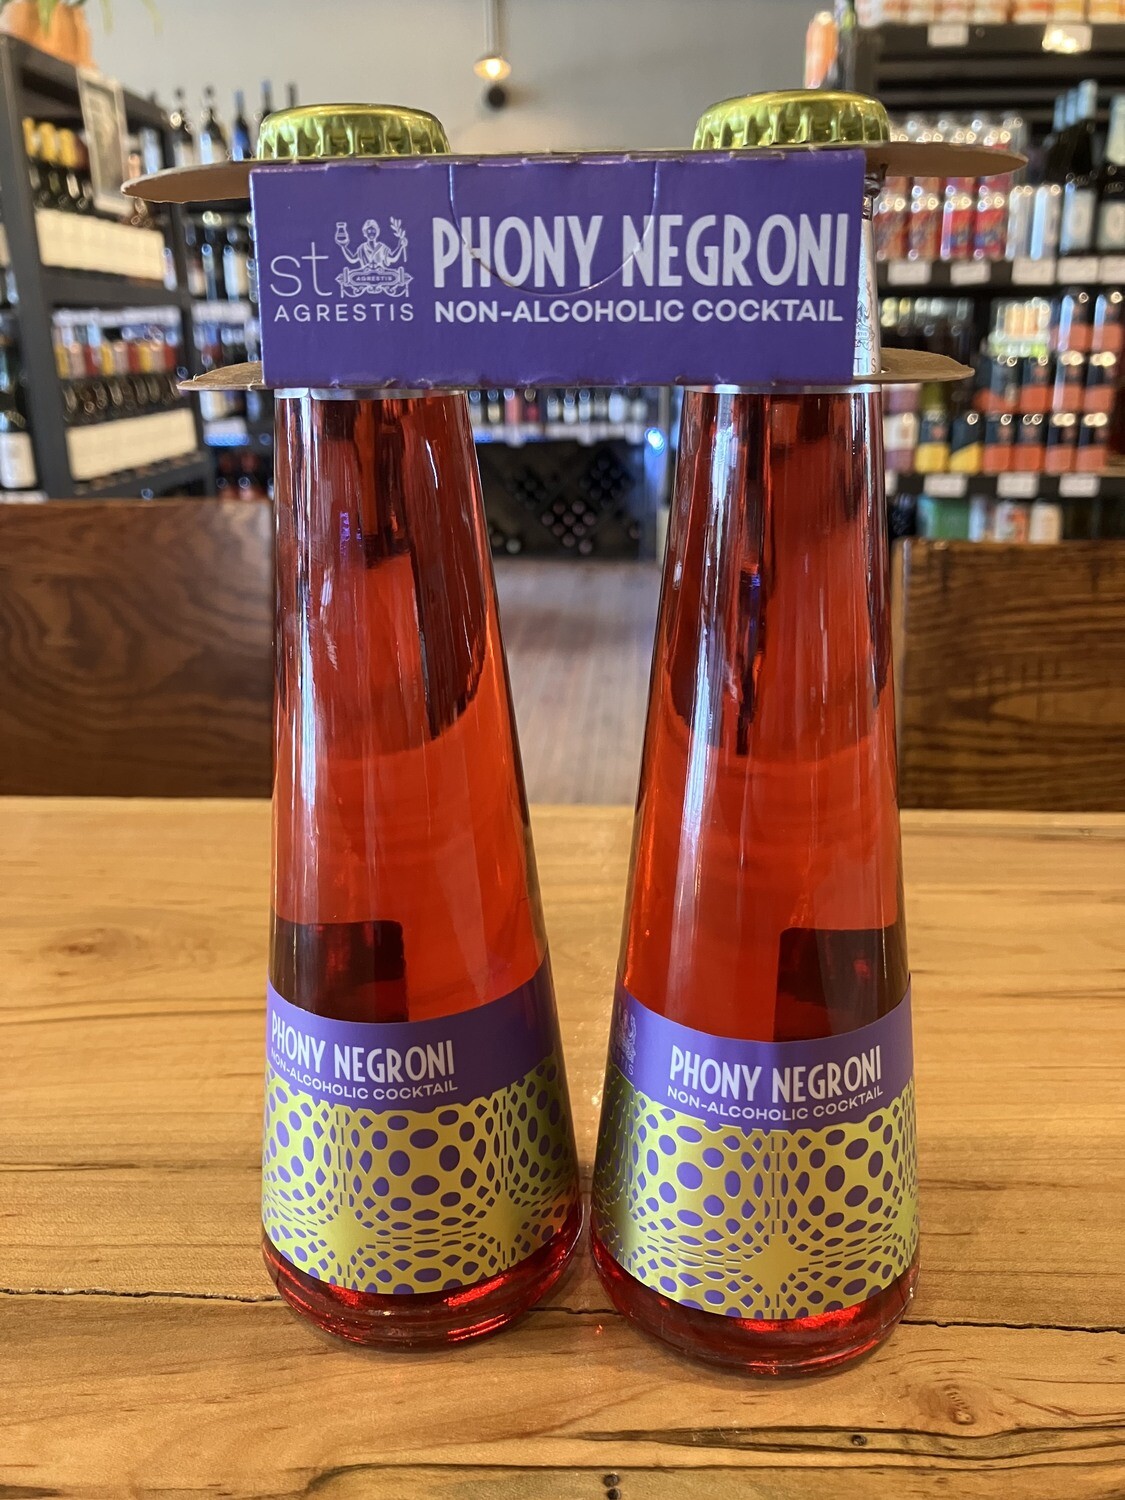 St Agrestis Phony Negroni N/A Cocktail 2-pack